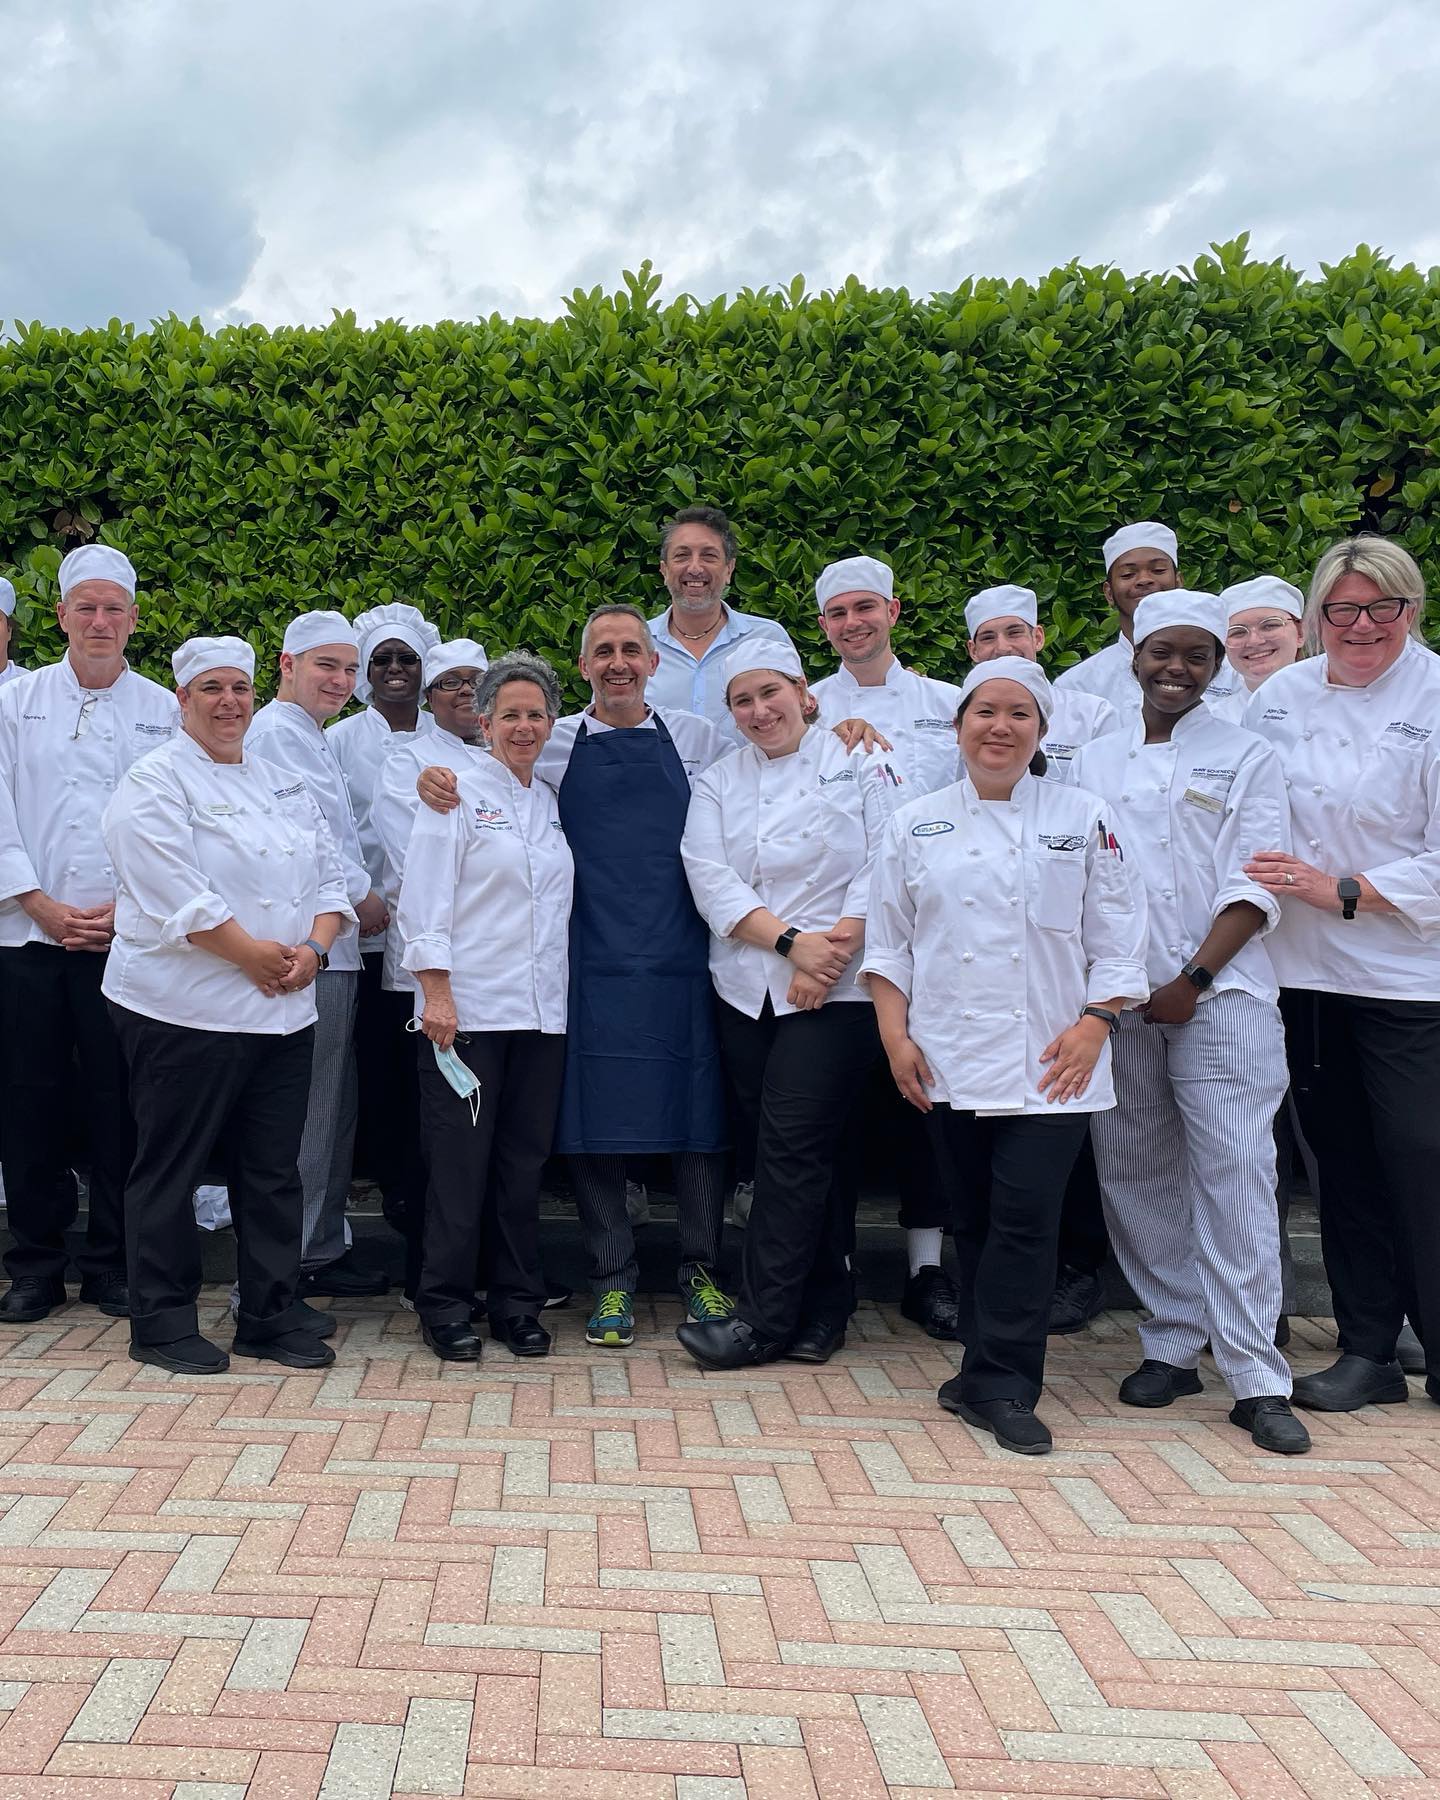 SUNY Schenectady culinary students and faculty in Italy, May 2022.